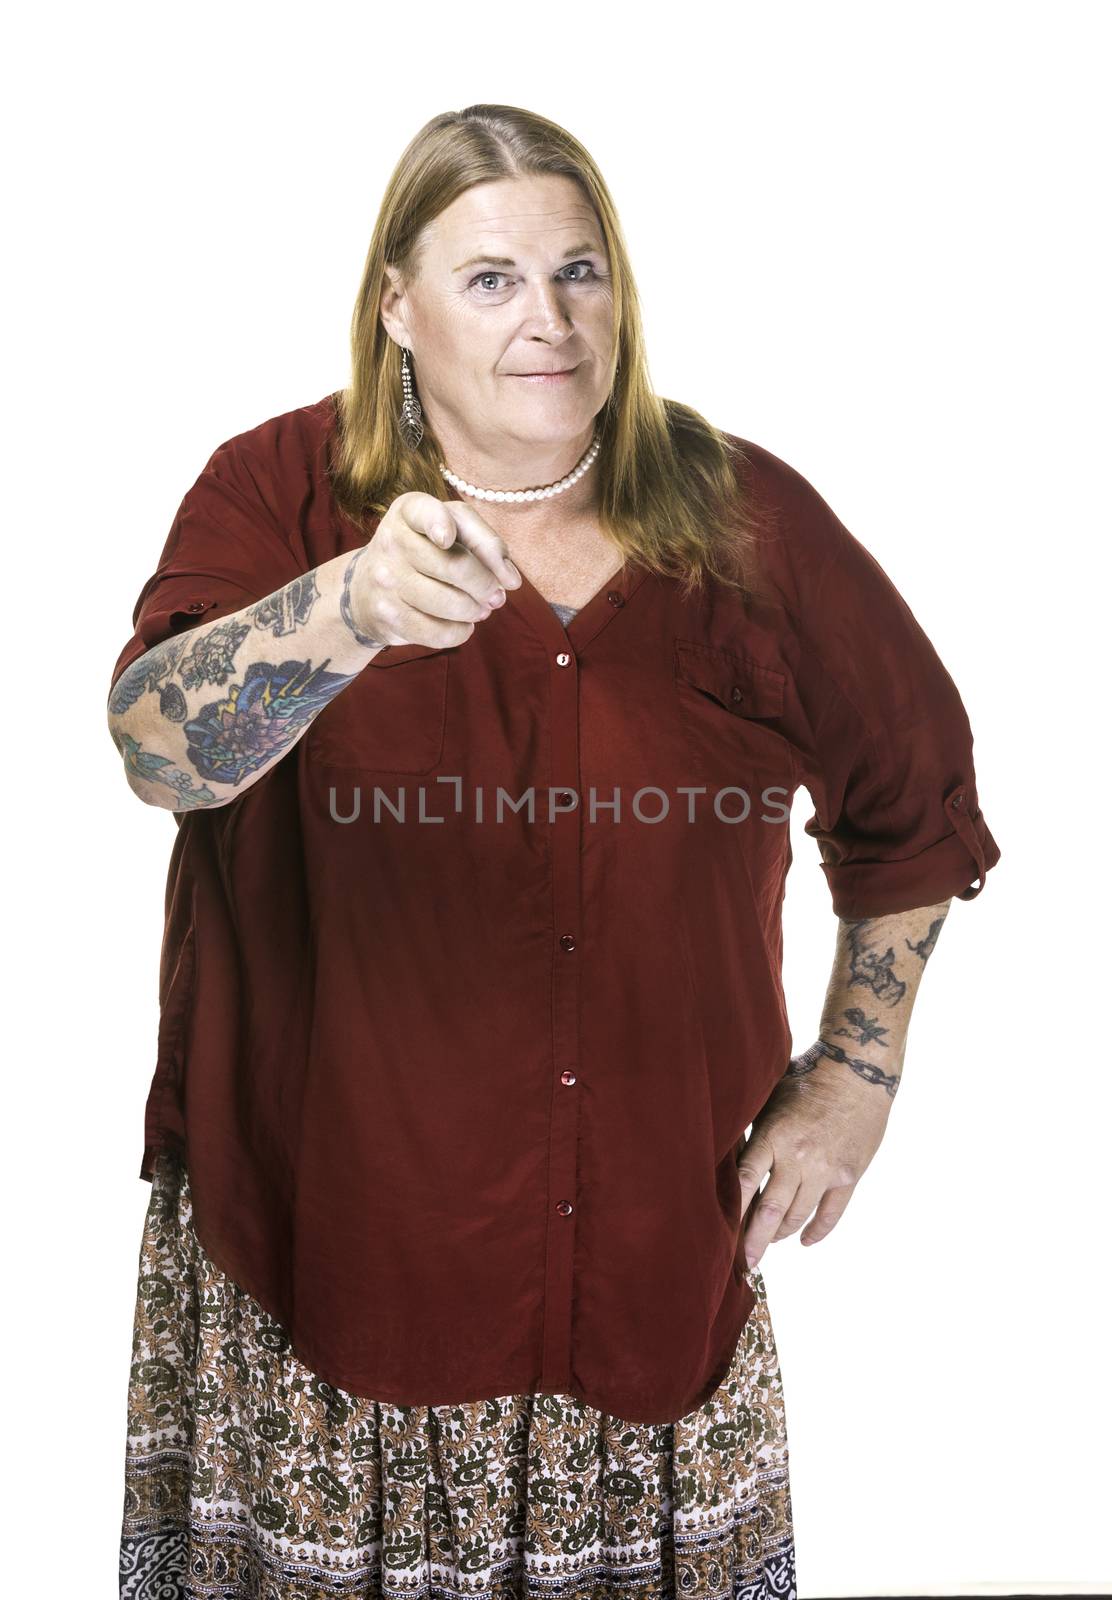 Transgender woman in pearl necklace on white background pointing